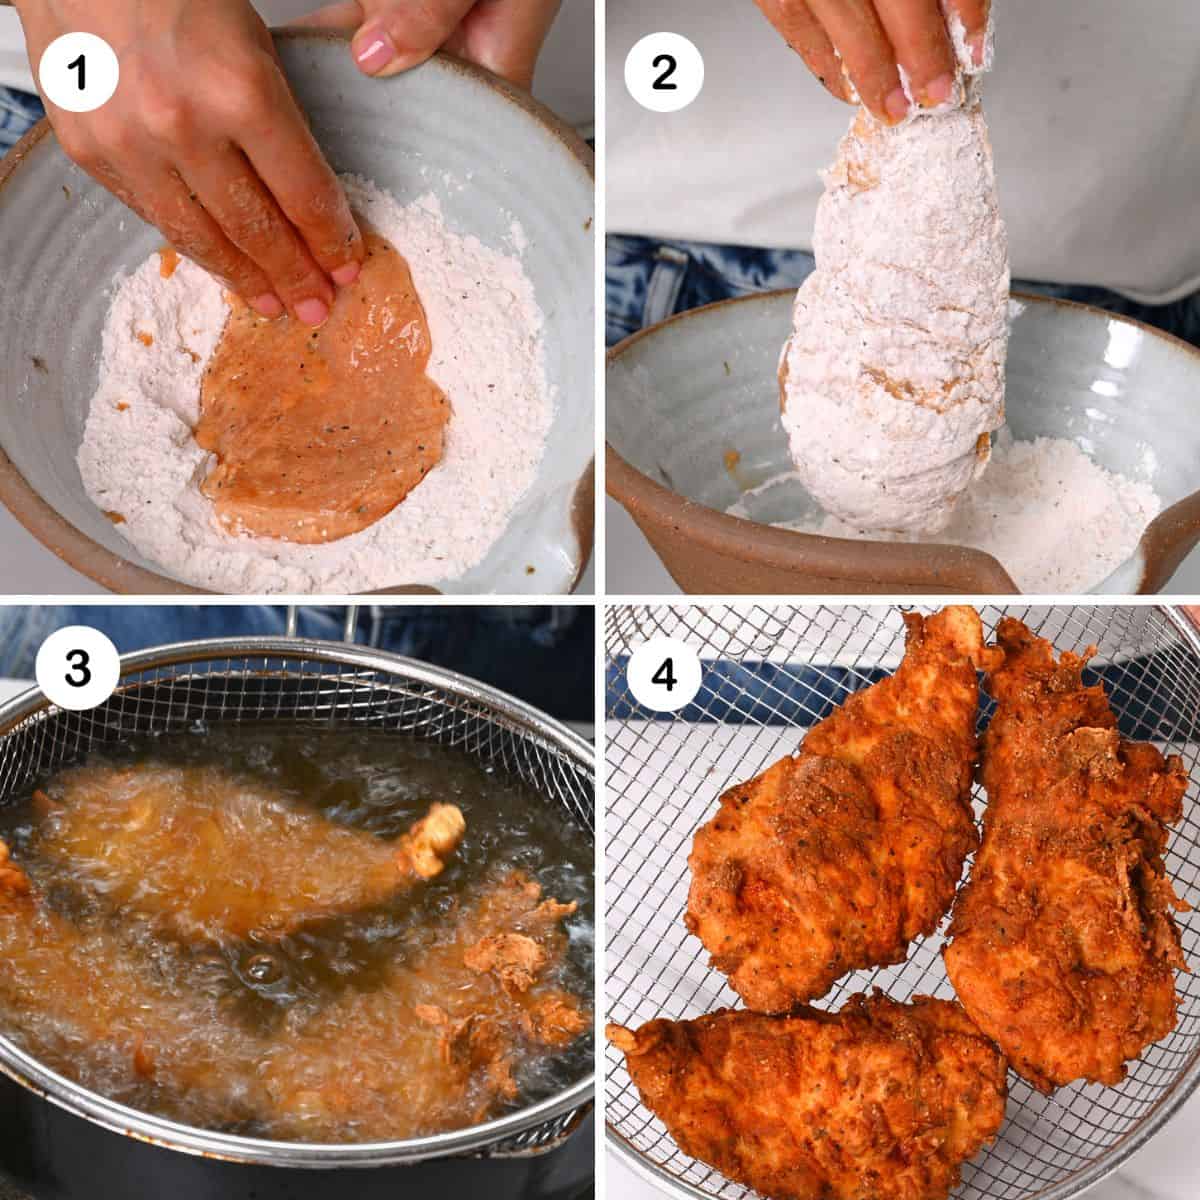 Steps for breading and frying chicken breasts